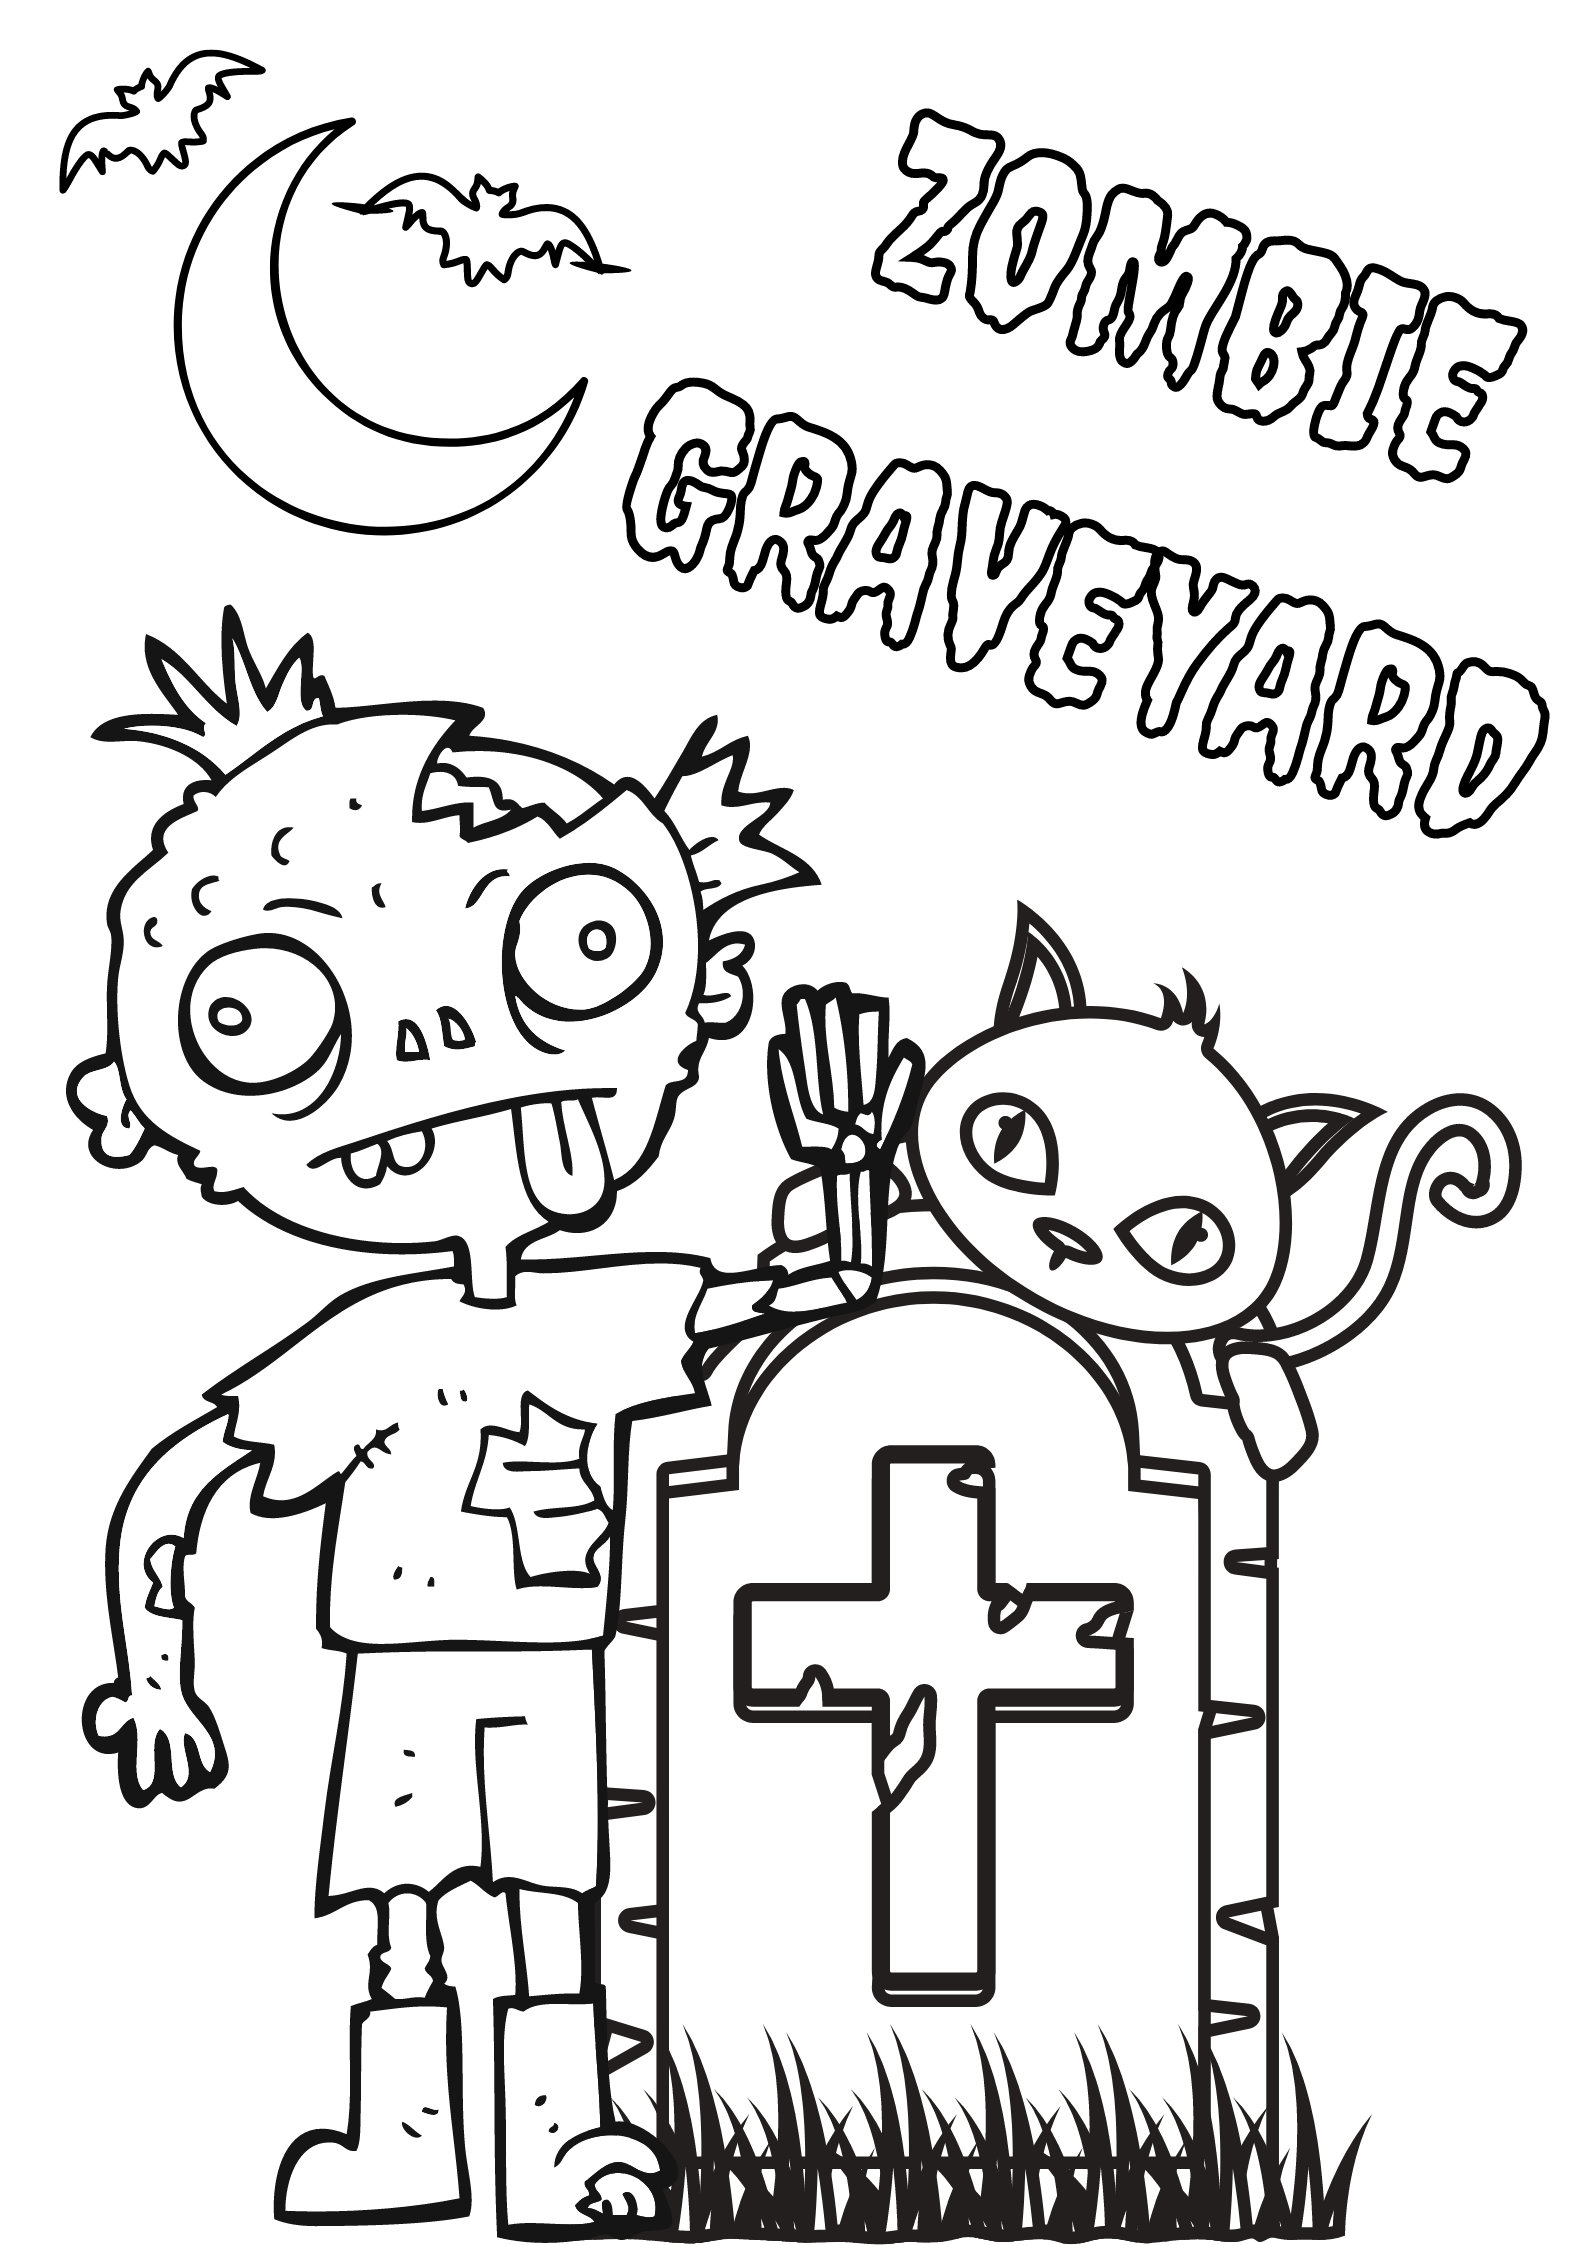 Halloween childrens coloring page zombie graveyard digital download